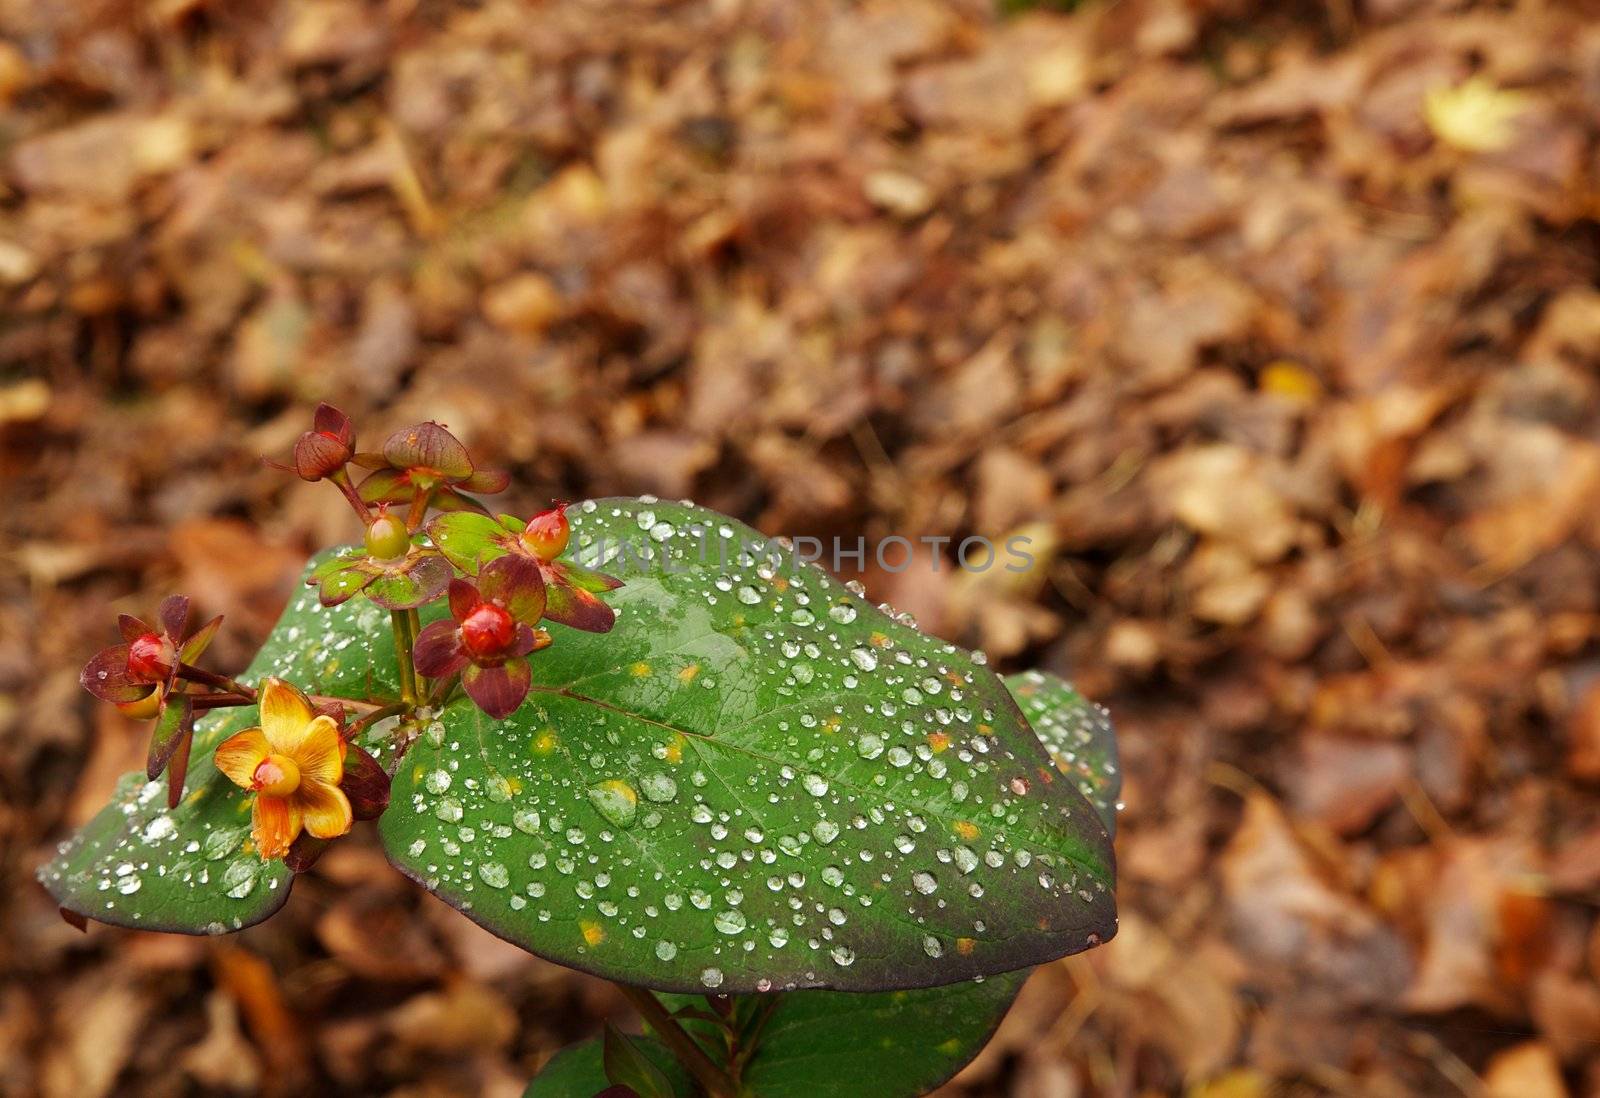 Baby winter rose bud and leaf covered in morning dew